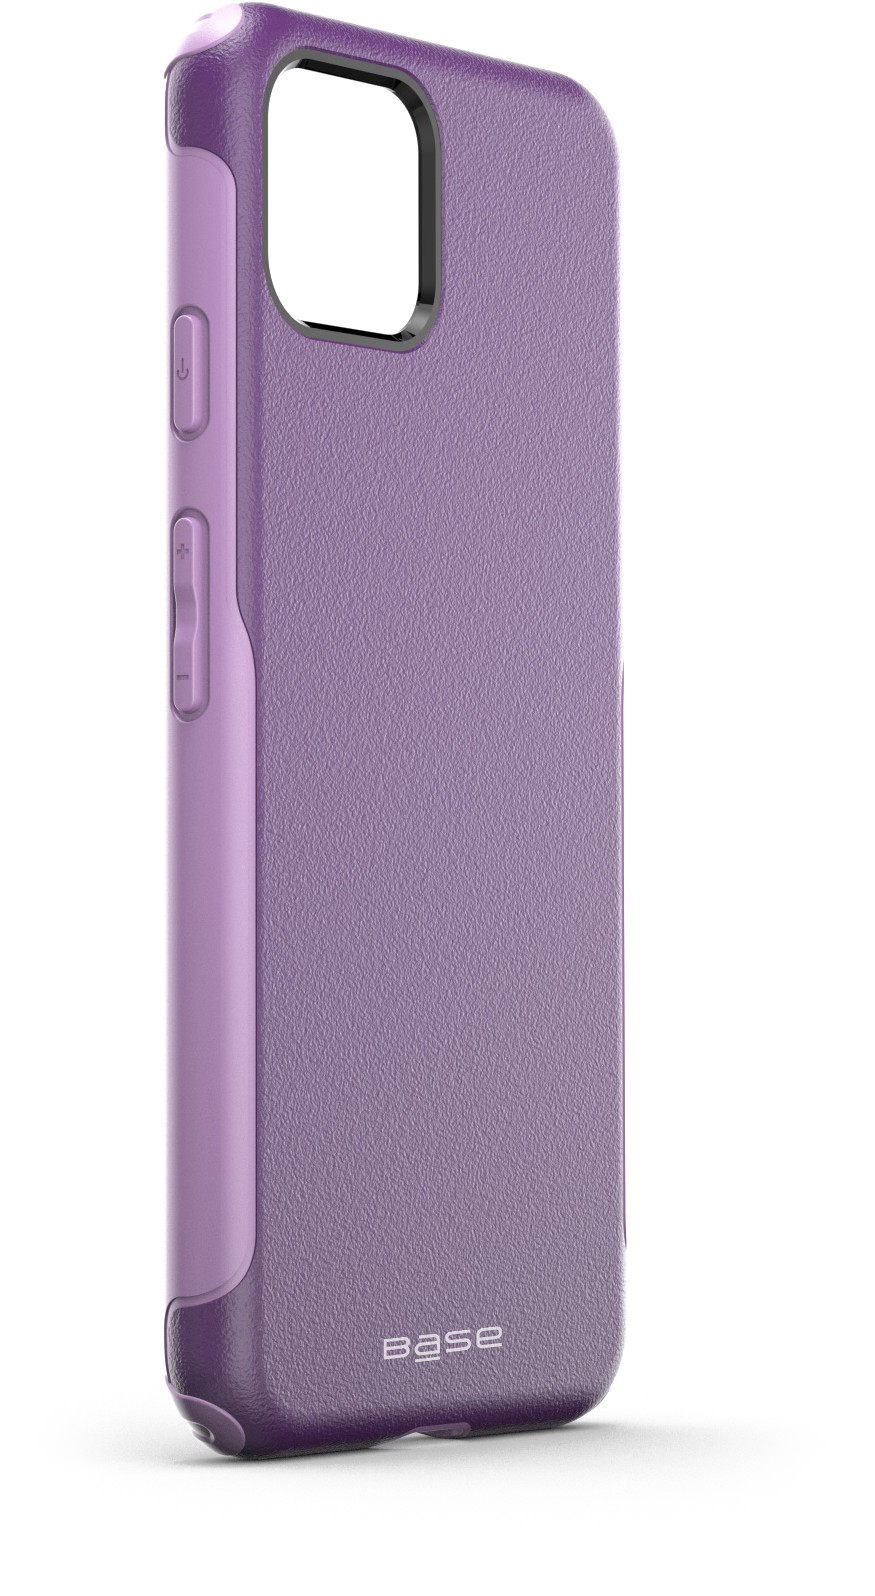 Base ProTech Rugged Armor Protective Case for Google Pixel 4 - Purple